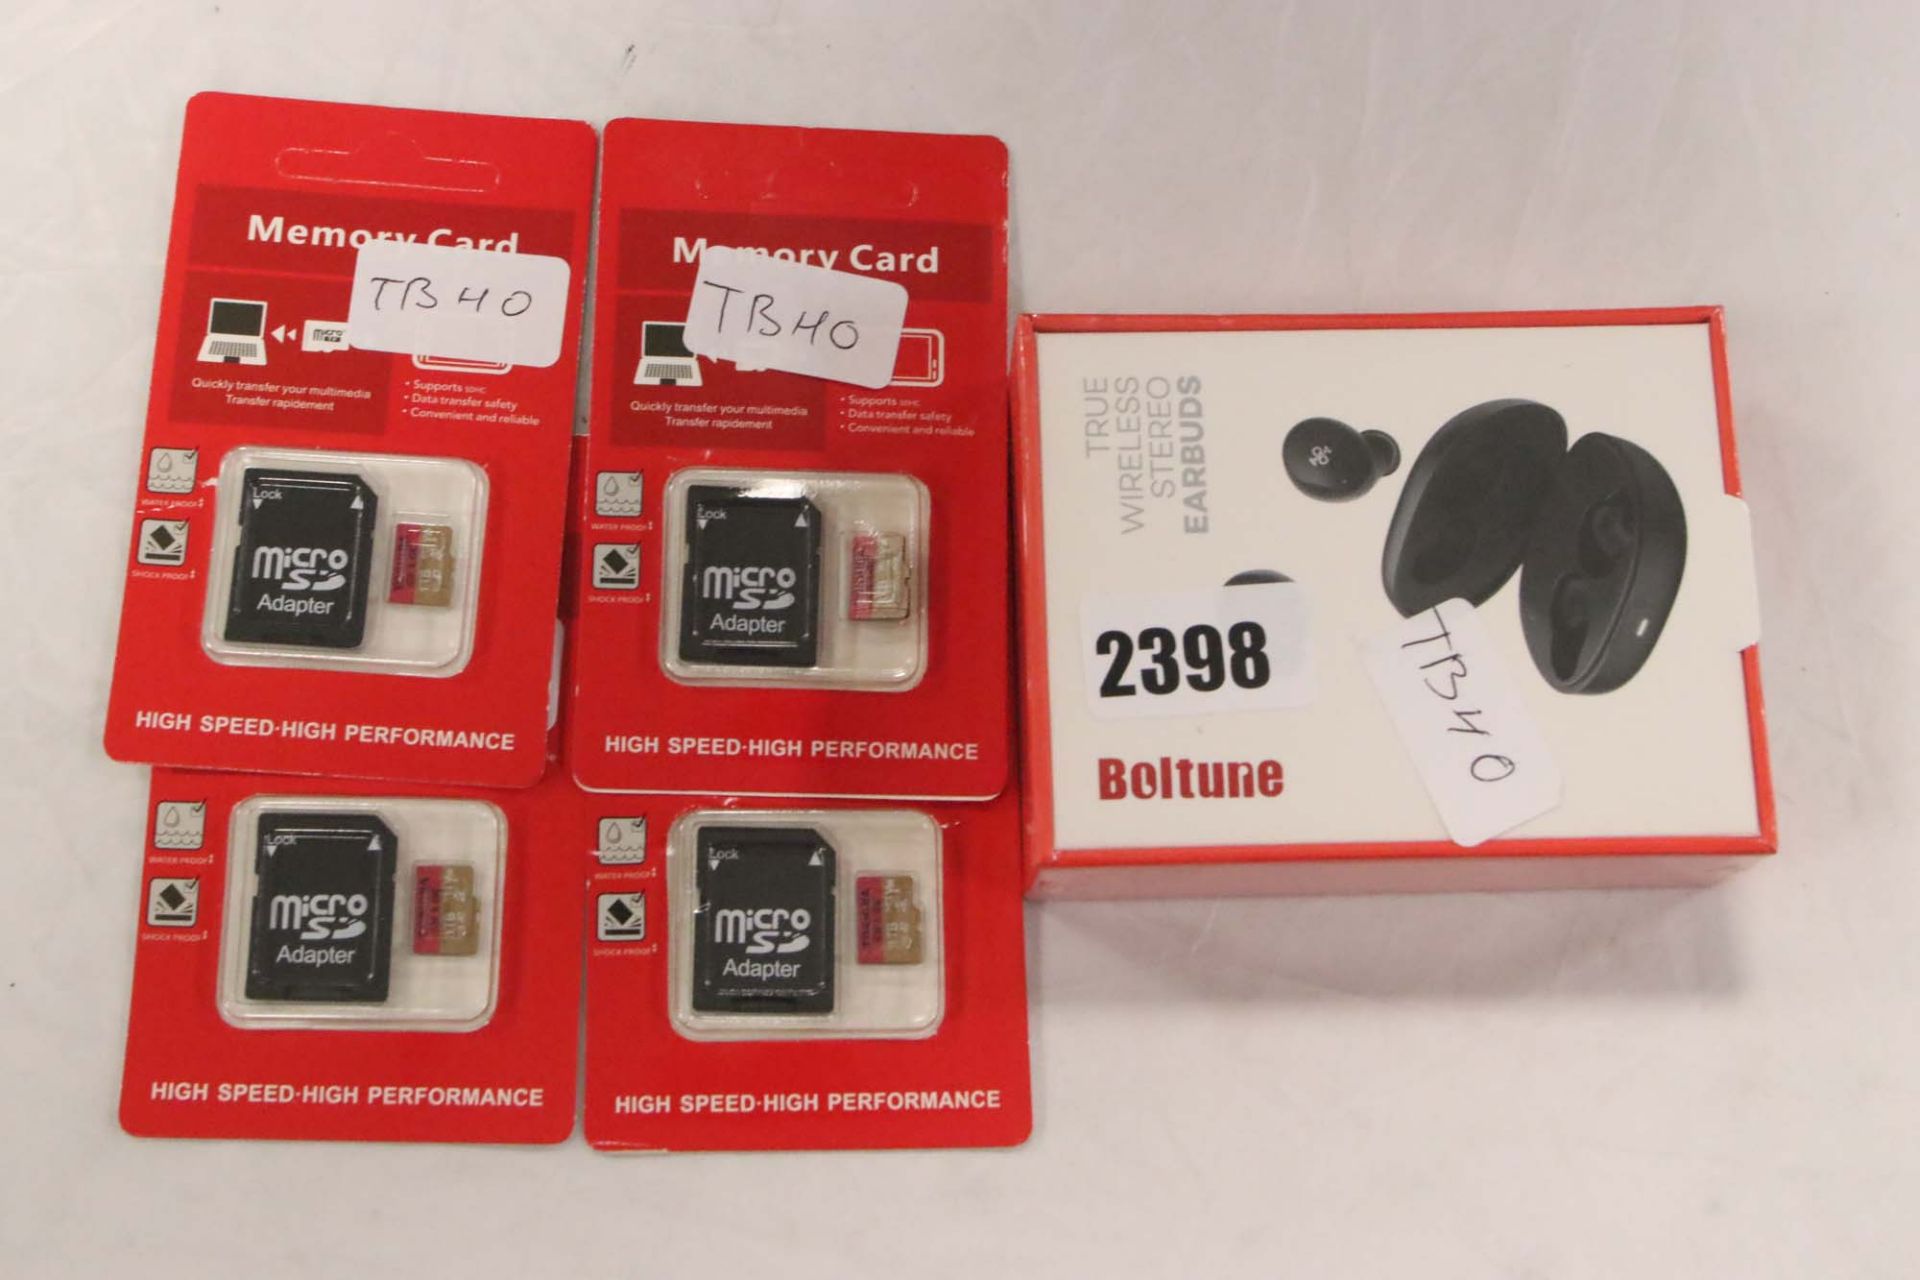 Boltune wireless earbuds with selection of 1TB micro SD memory cards